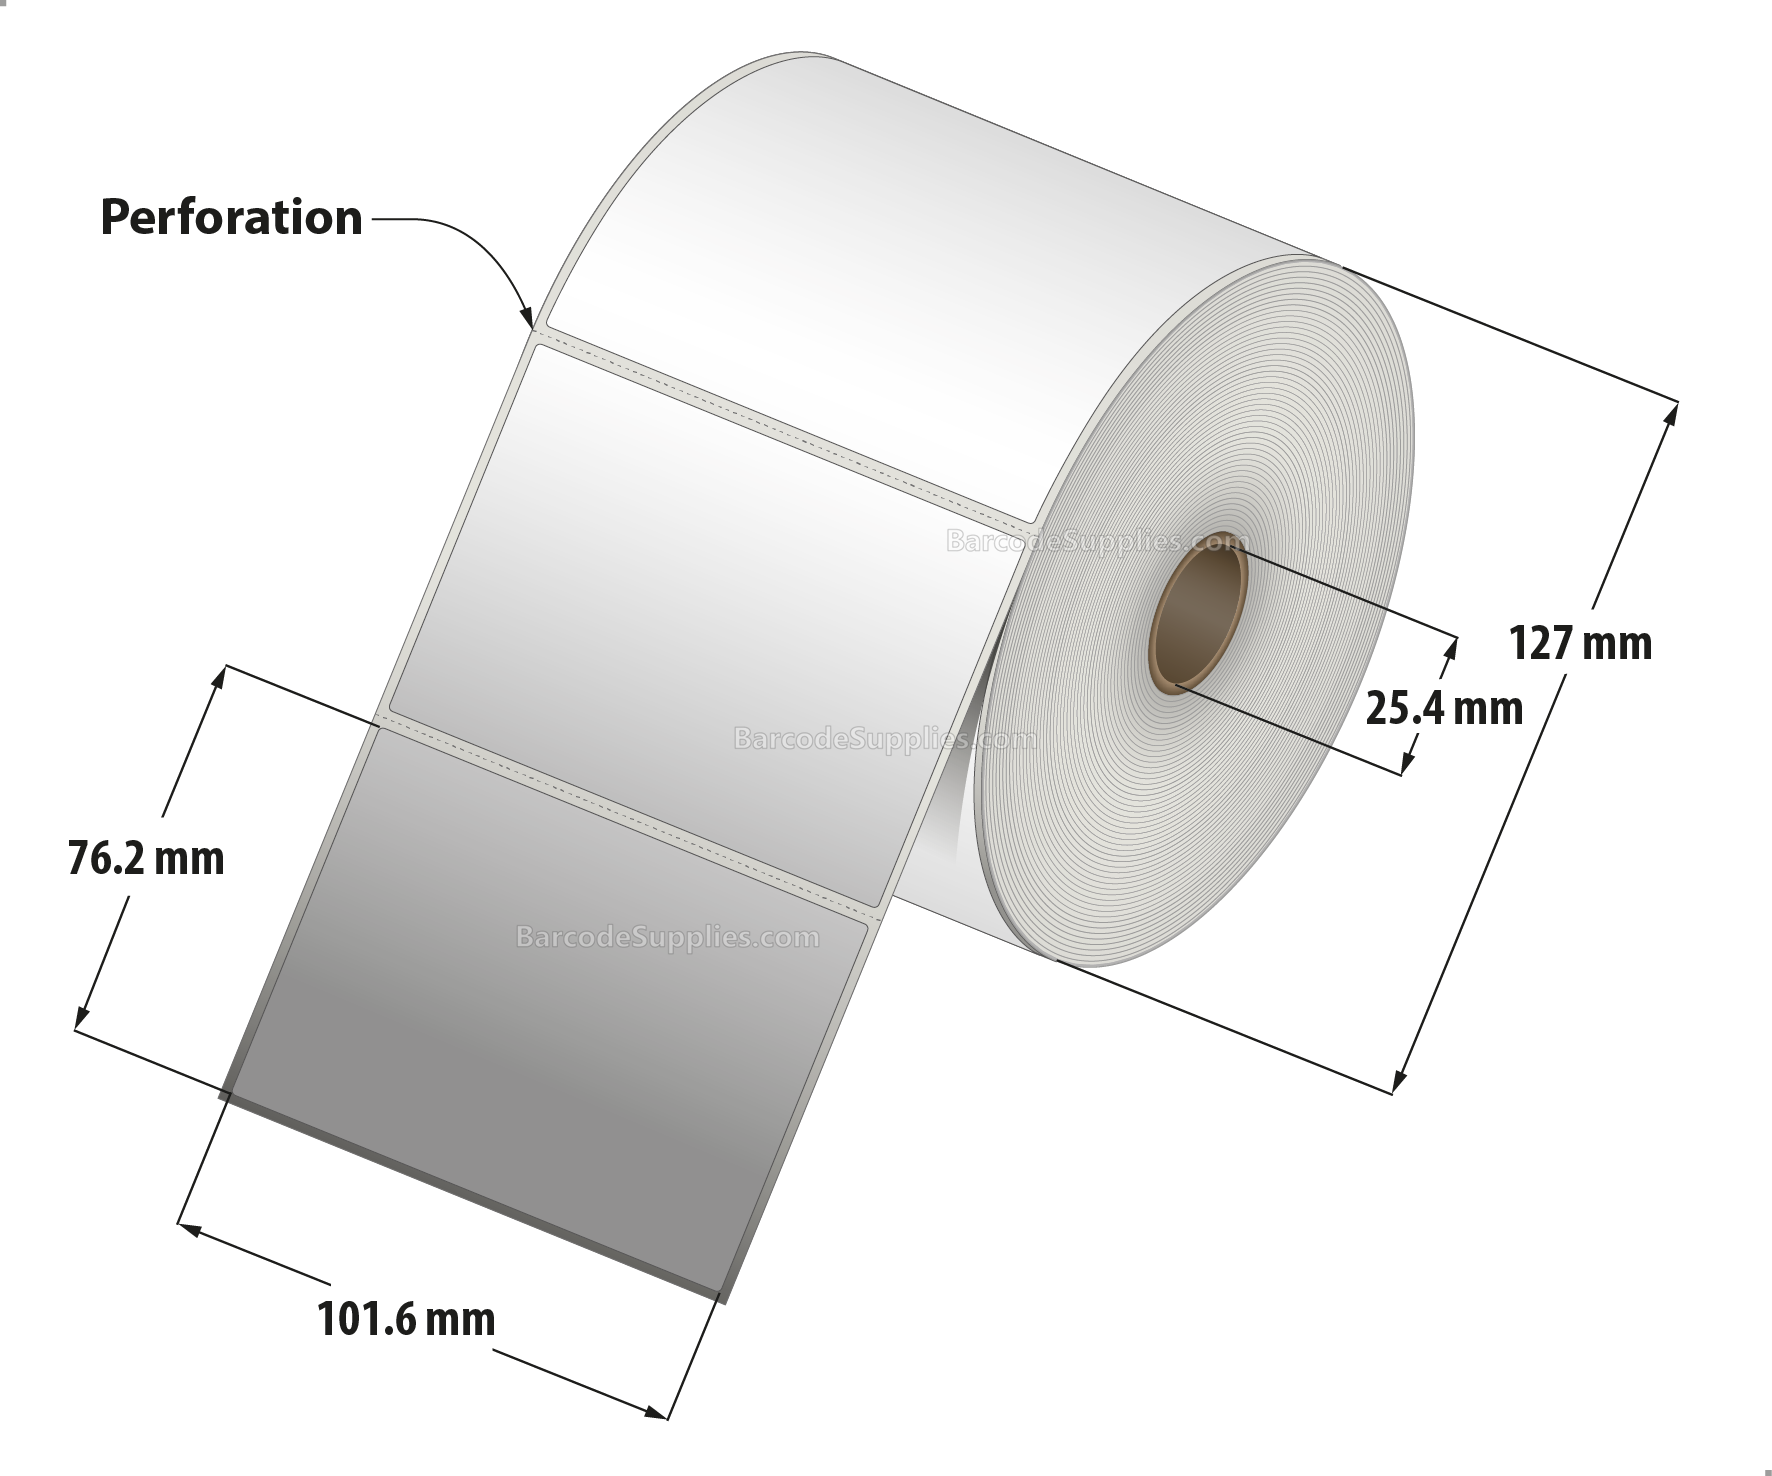 4 x 3 Thermal Transfer White Labels With Permanent Acrylic Adhesive - Perforated - 850 Labels Per Roll - Carton Of 4 Rolls - 3400 Labels Total - MPN: TH43-15PTT